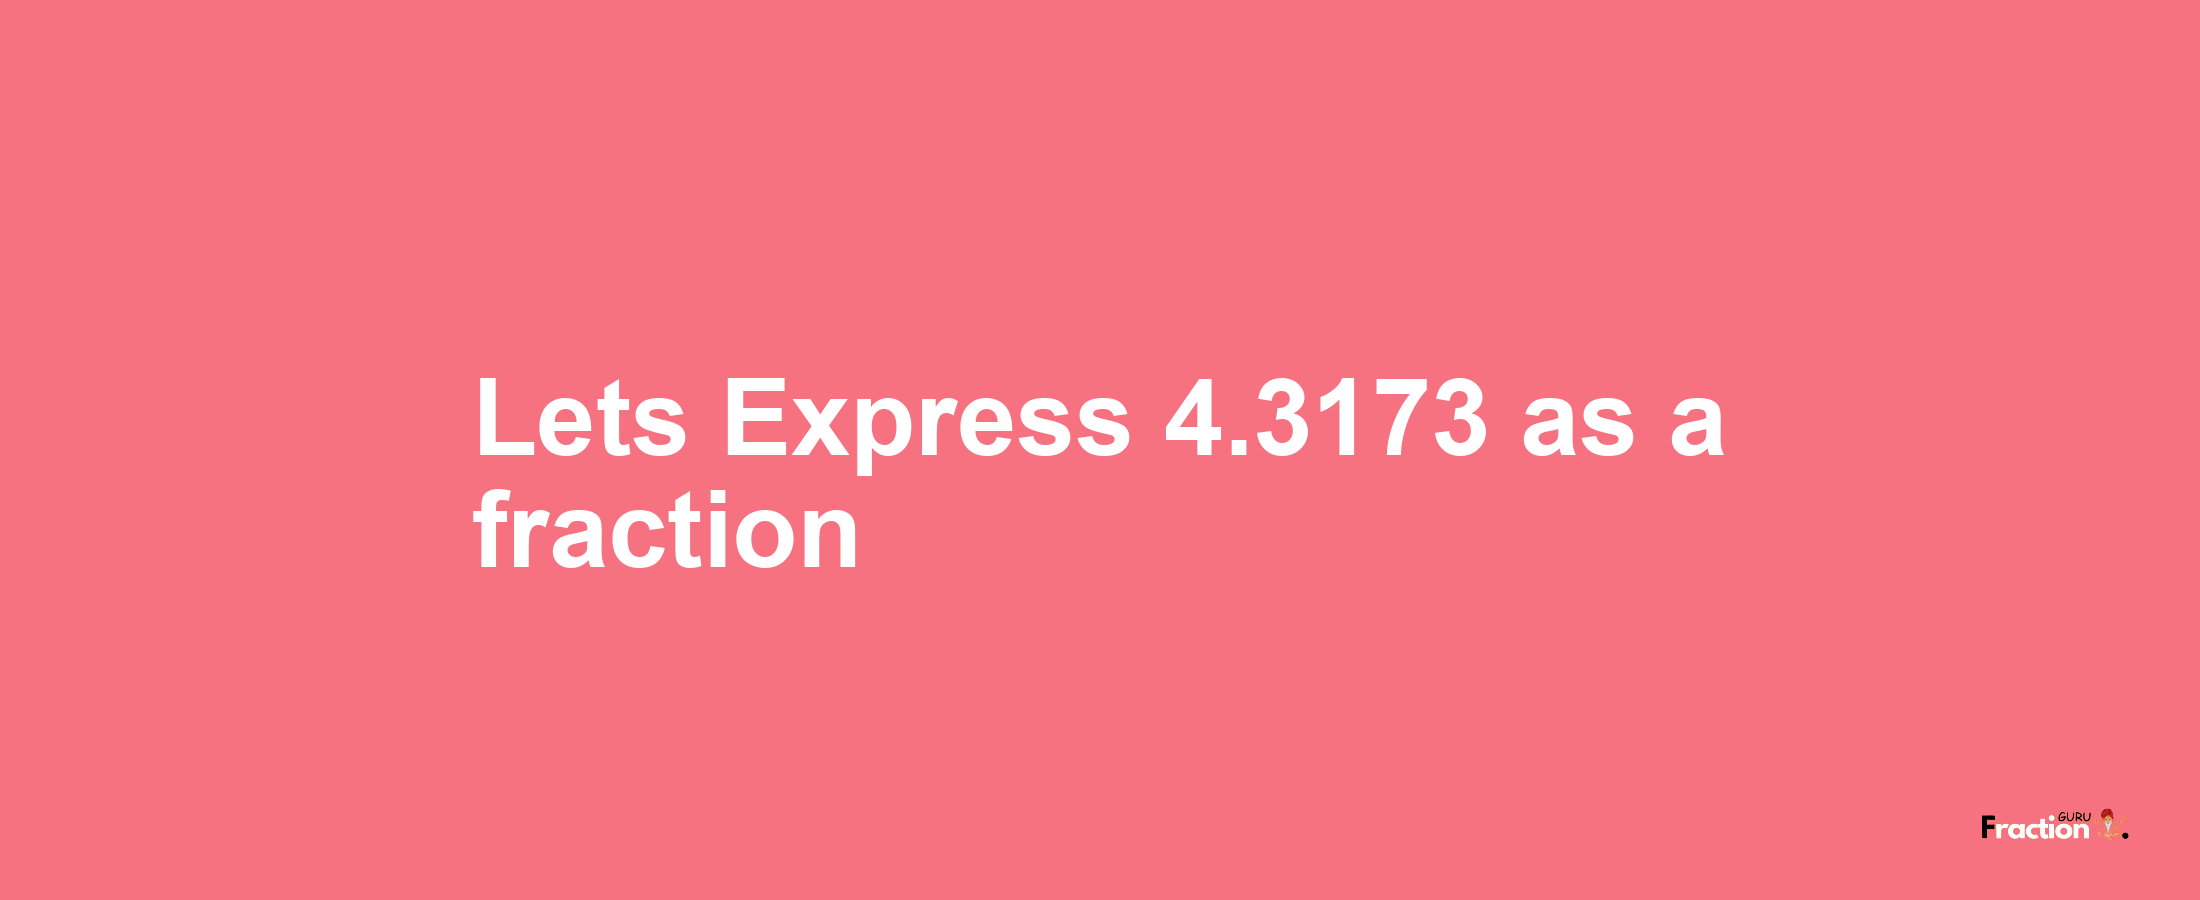 Lets Express 4.3173 as afraction